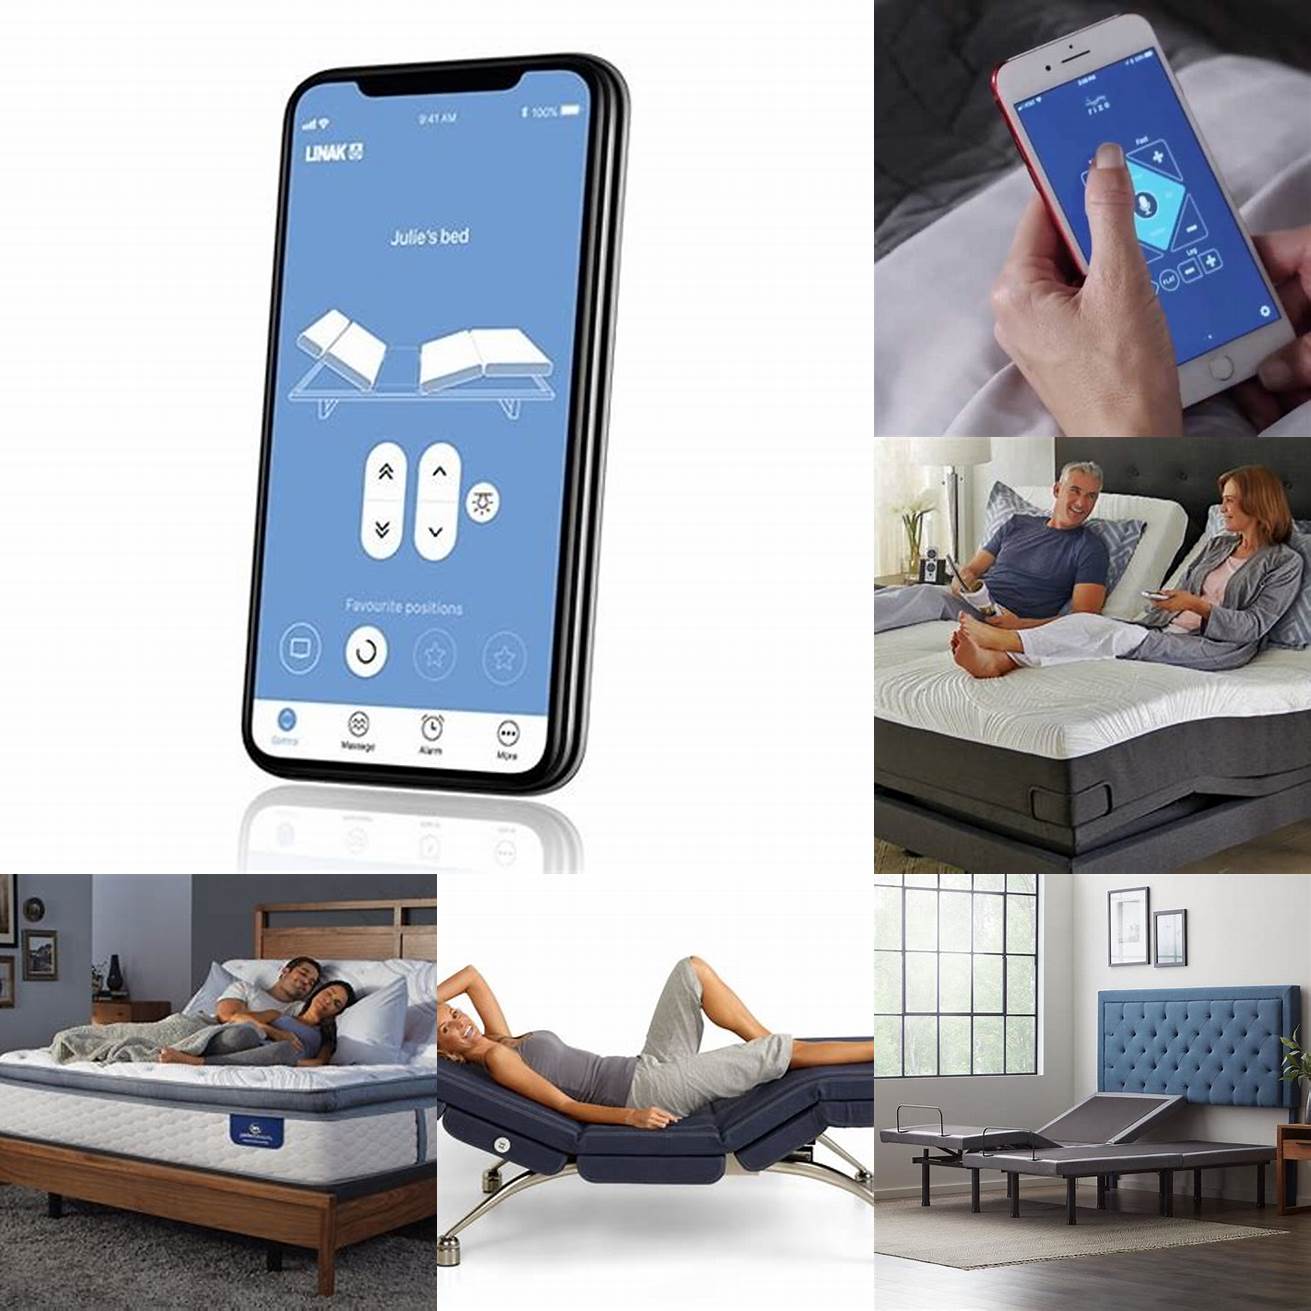 A person adjusting the beds settings on the mobile app